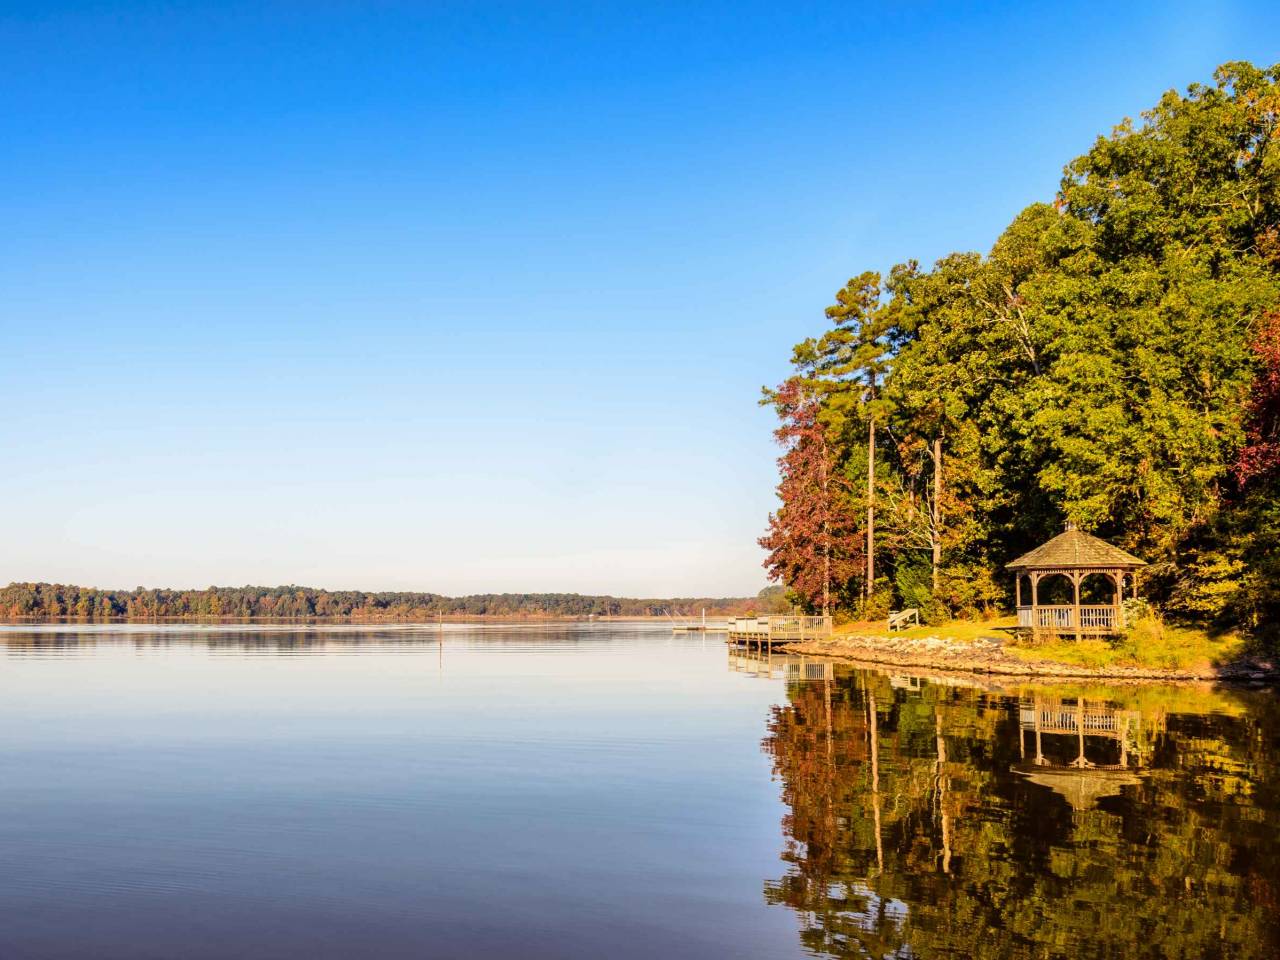 Still and clear waters of Lake Crabtree in Morrisville, North Carolina has captured the beautiful reflection of the land, trees and the clear blue sky.